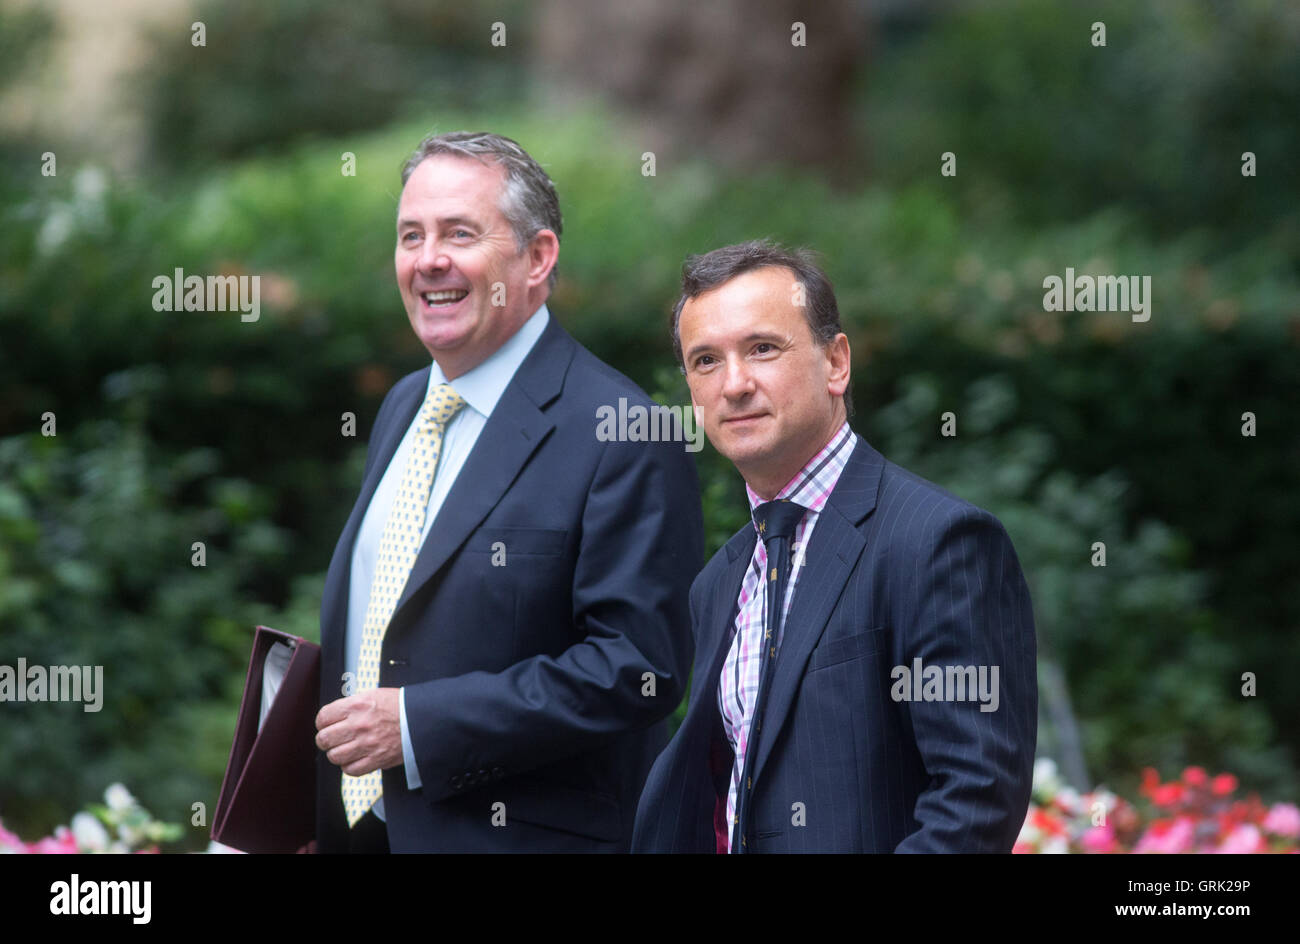 International Trade Secretary Liam Fox and Welsh Secretary Alun Cairns arrive at Downing street for the weekly cabinet meeting. Stock Photo